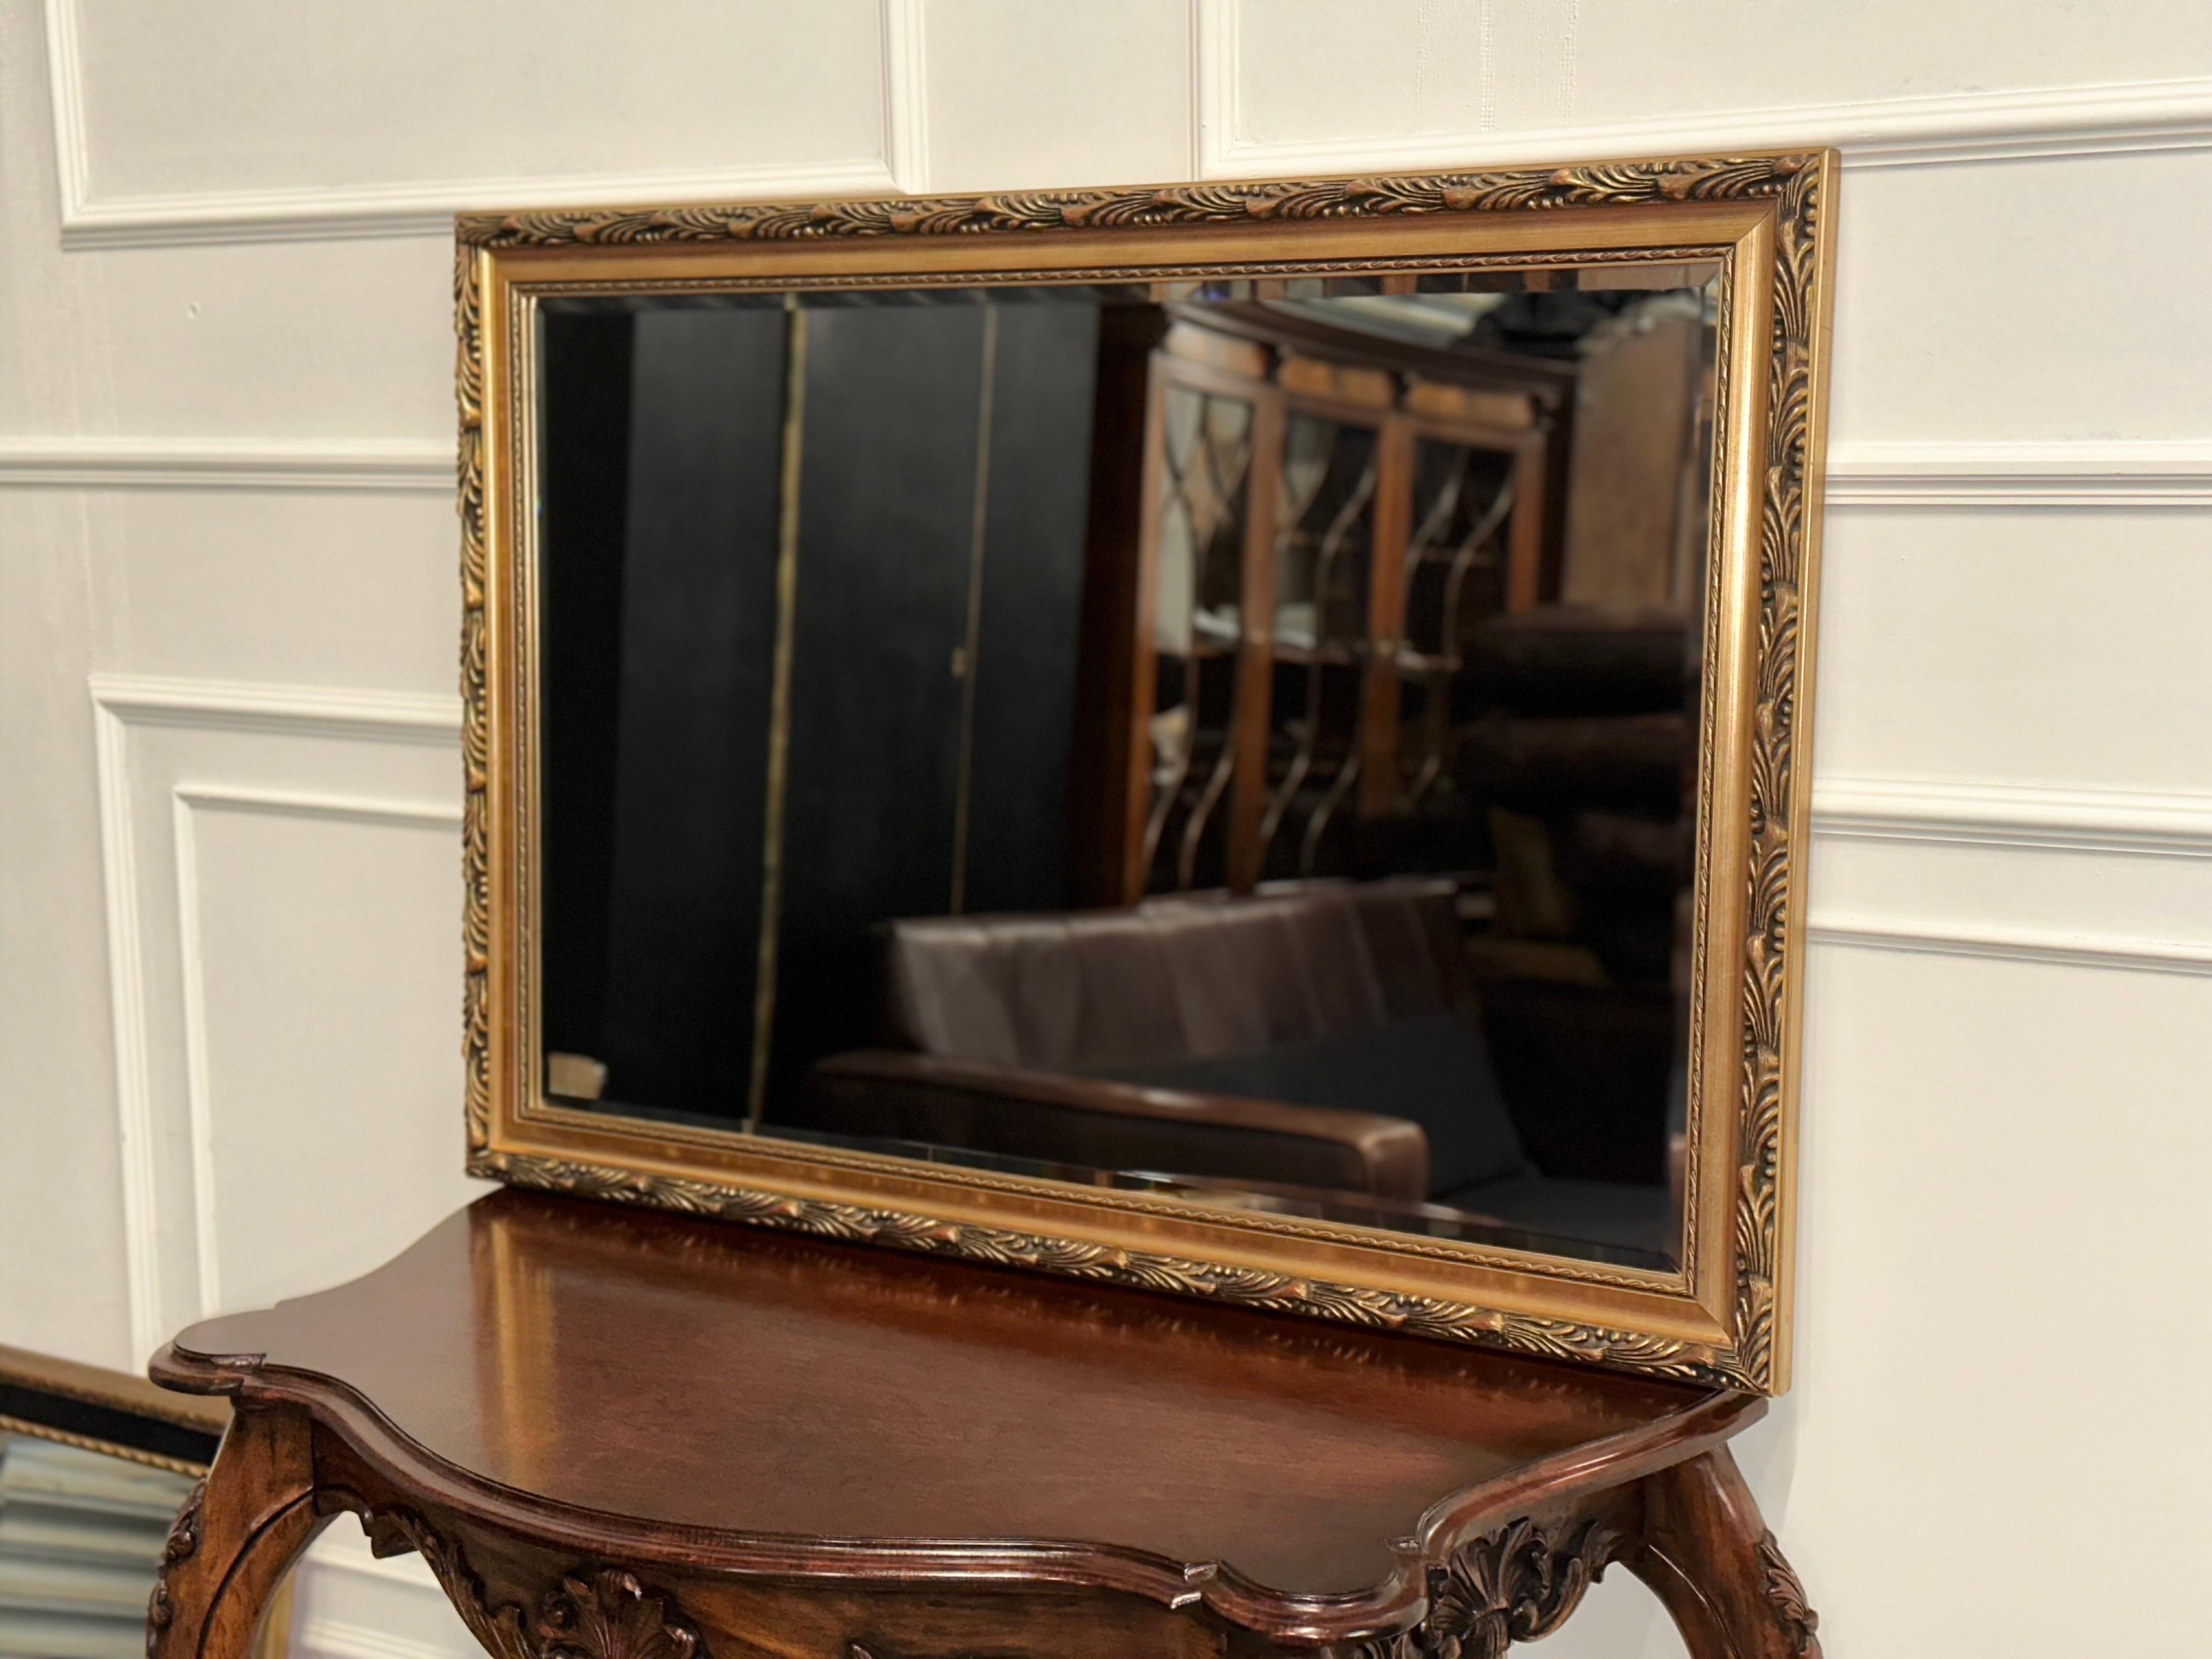 We are delighted to offer for sale this Lovely Gold Ornate Bevelled Mirror.

Please carefully examine the pictures to see the condition before purchasing, as they form part of the description. If you have any questions, please message us.